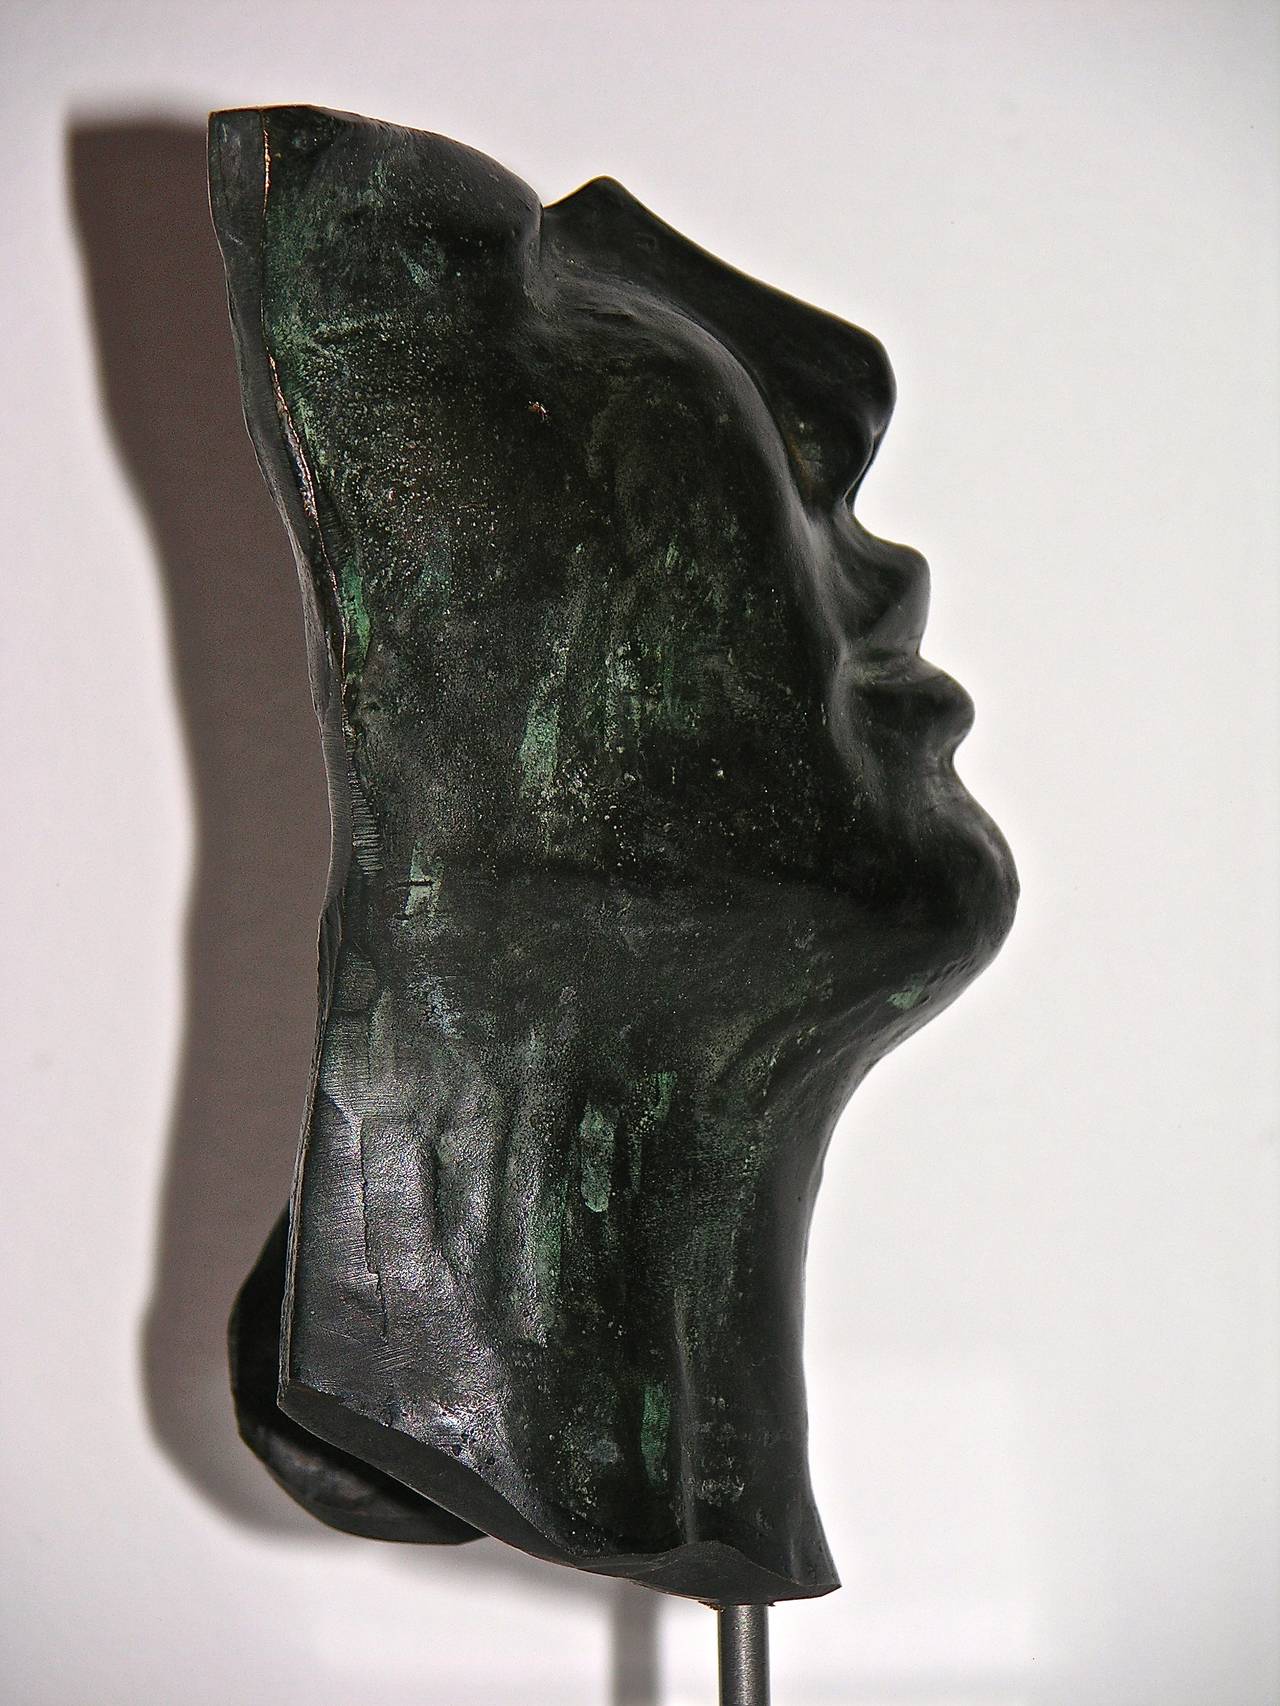 Metal Hollow Face, Italian Black Bronze Sculpture on Lucite Base by Ginestroni